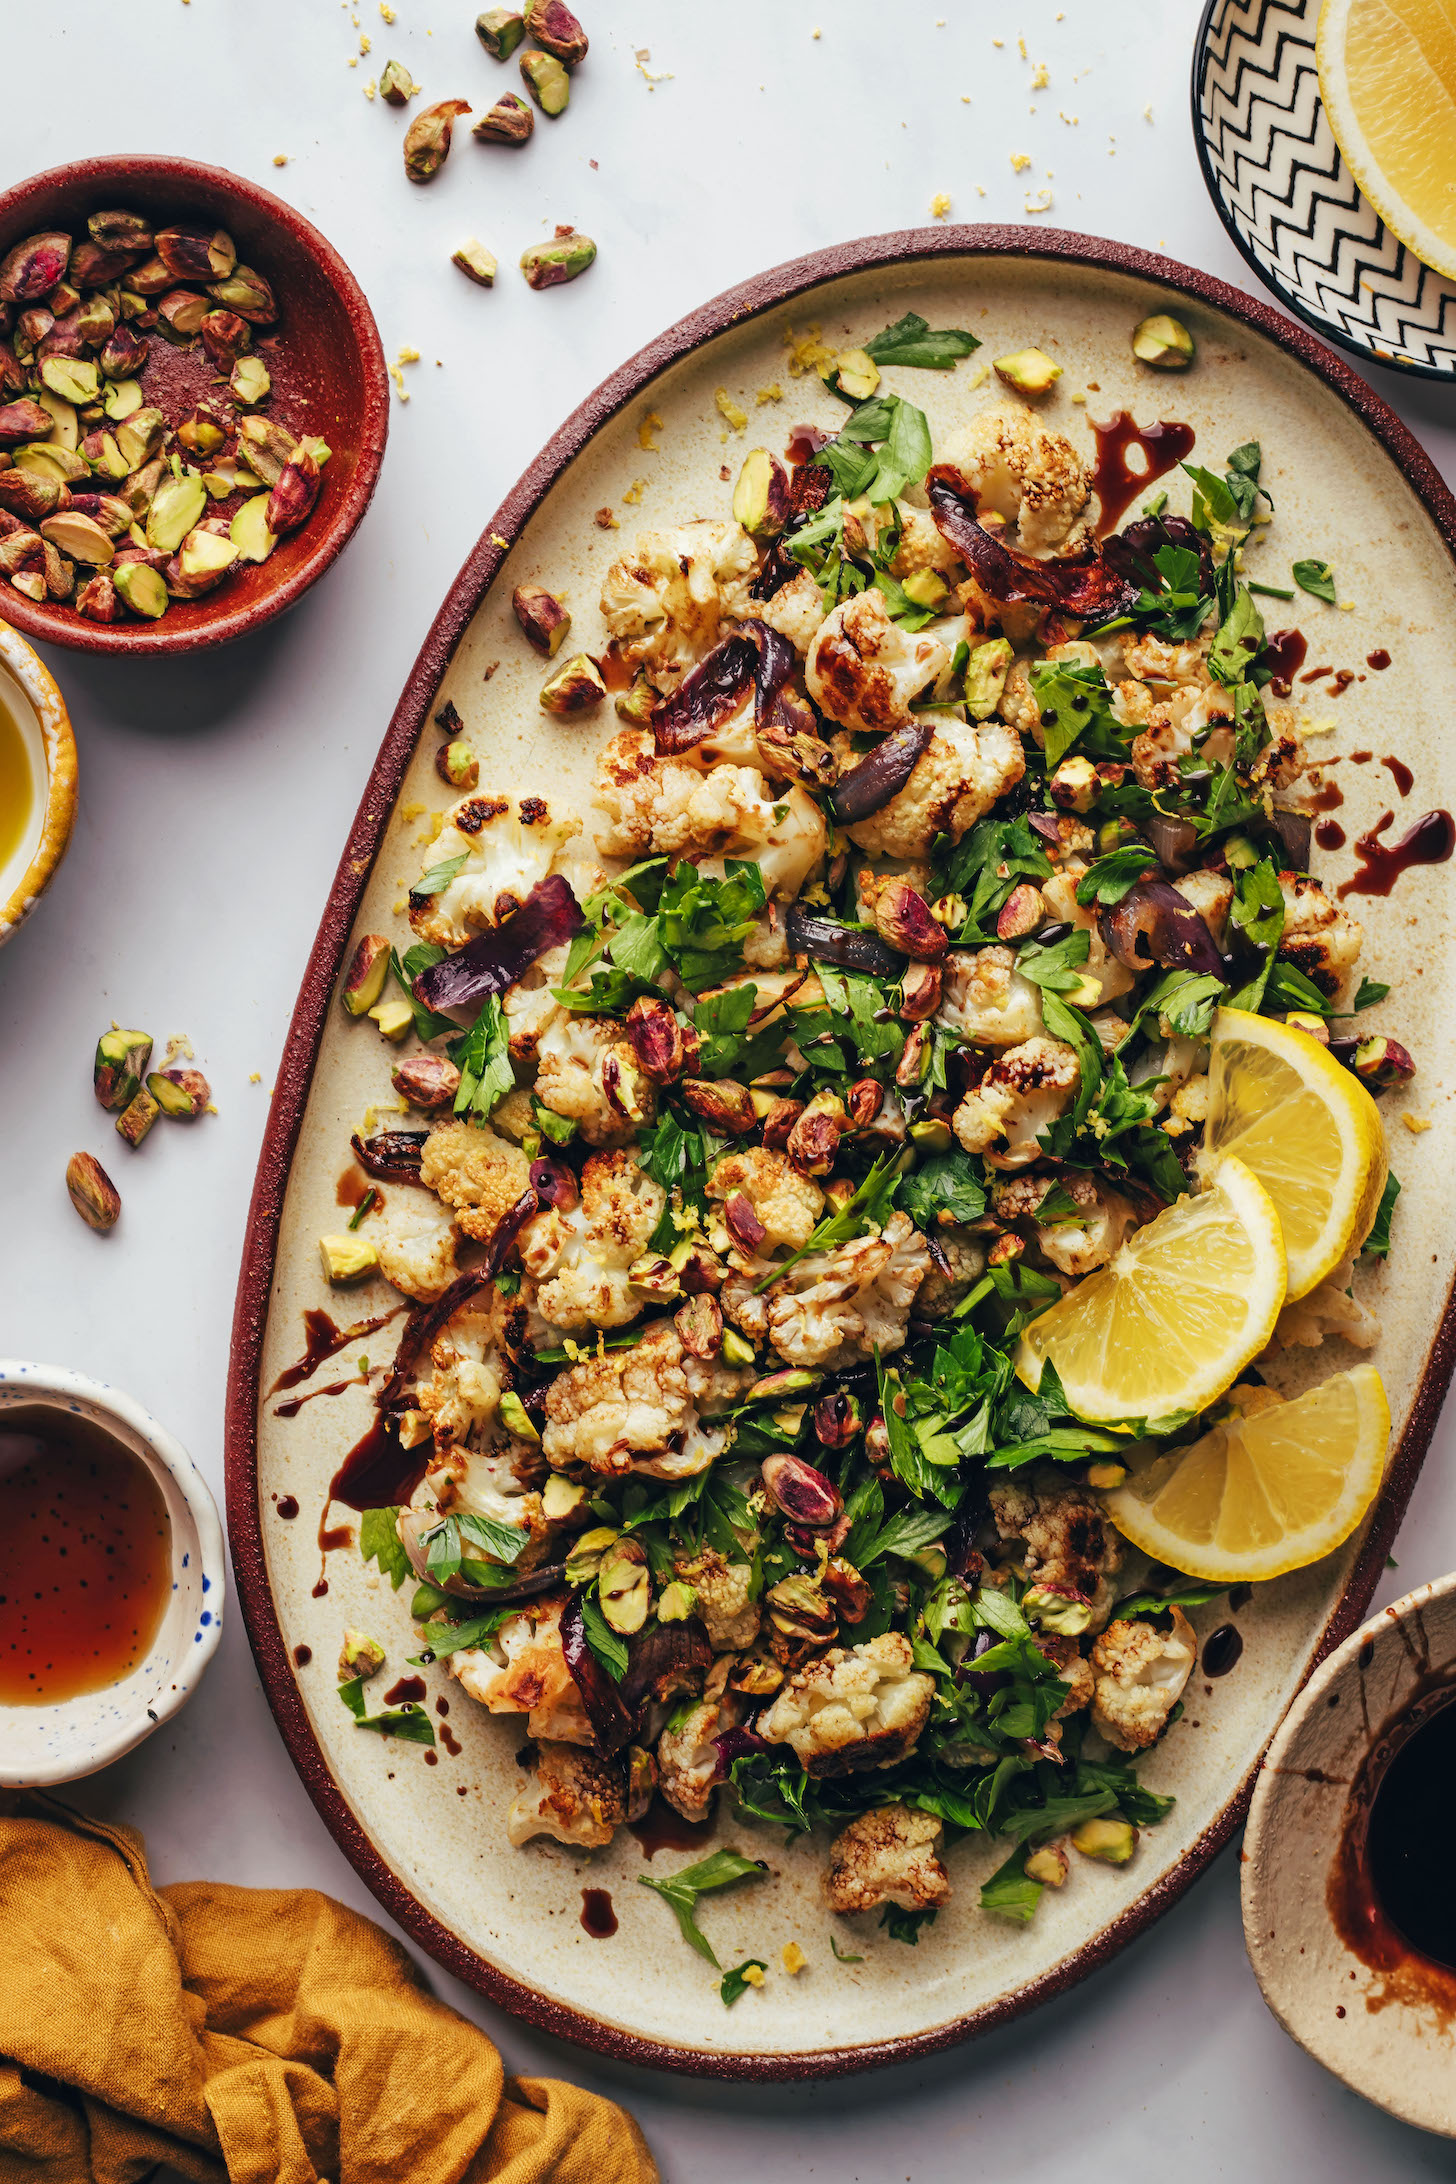 Pistachios and lemon slices next to a dish from our roasted cauliflower salad recipe